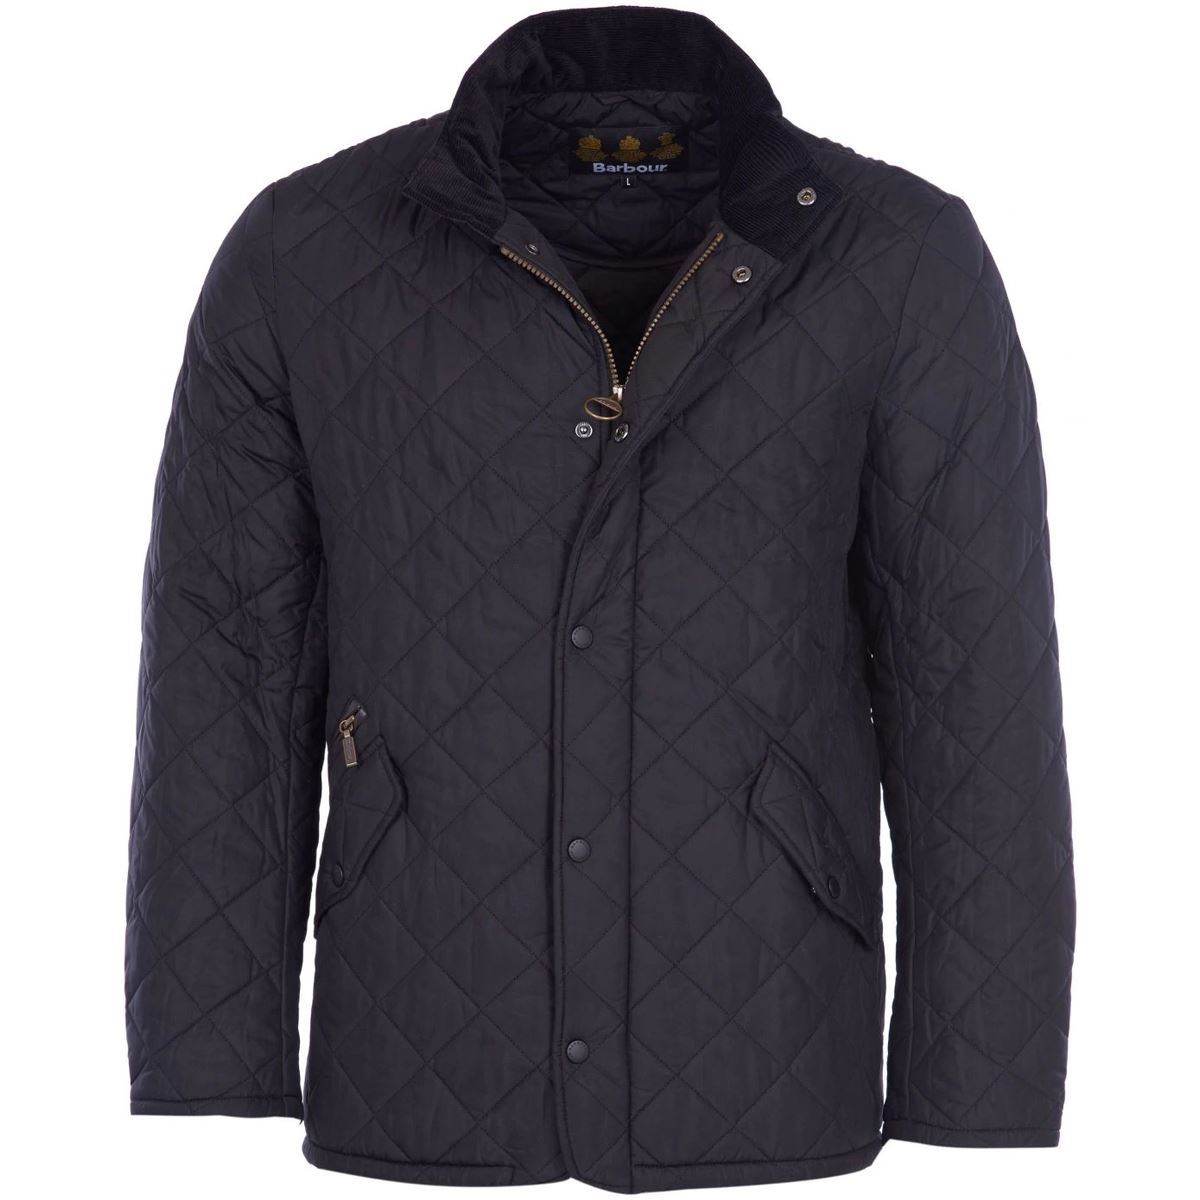 Is a Barbour jacket warm enough for winter?